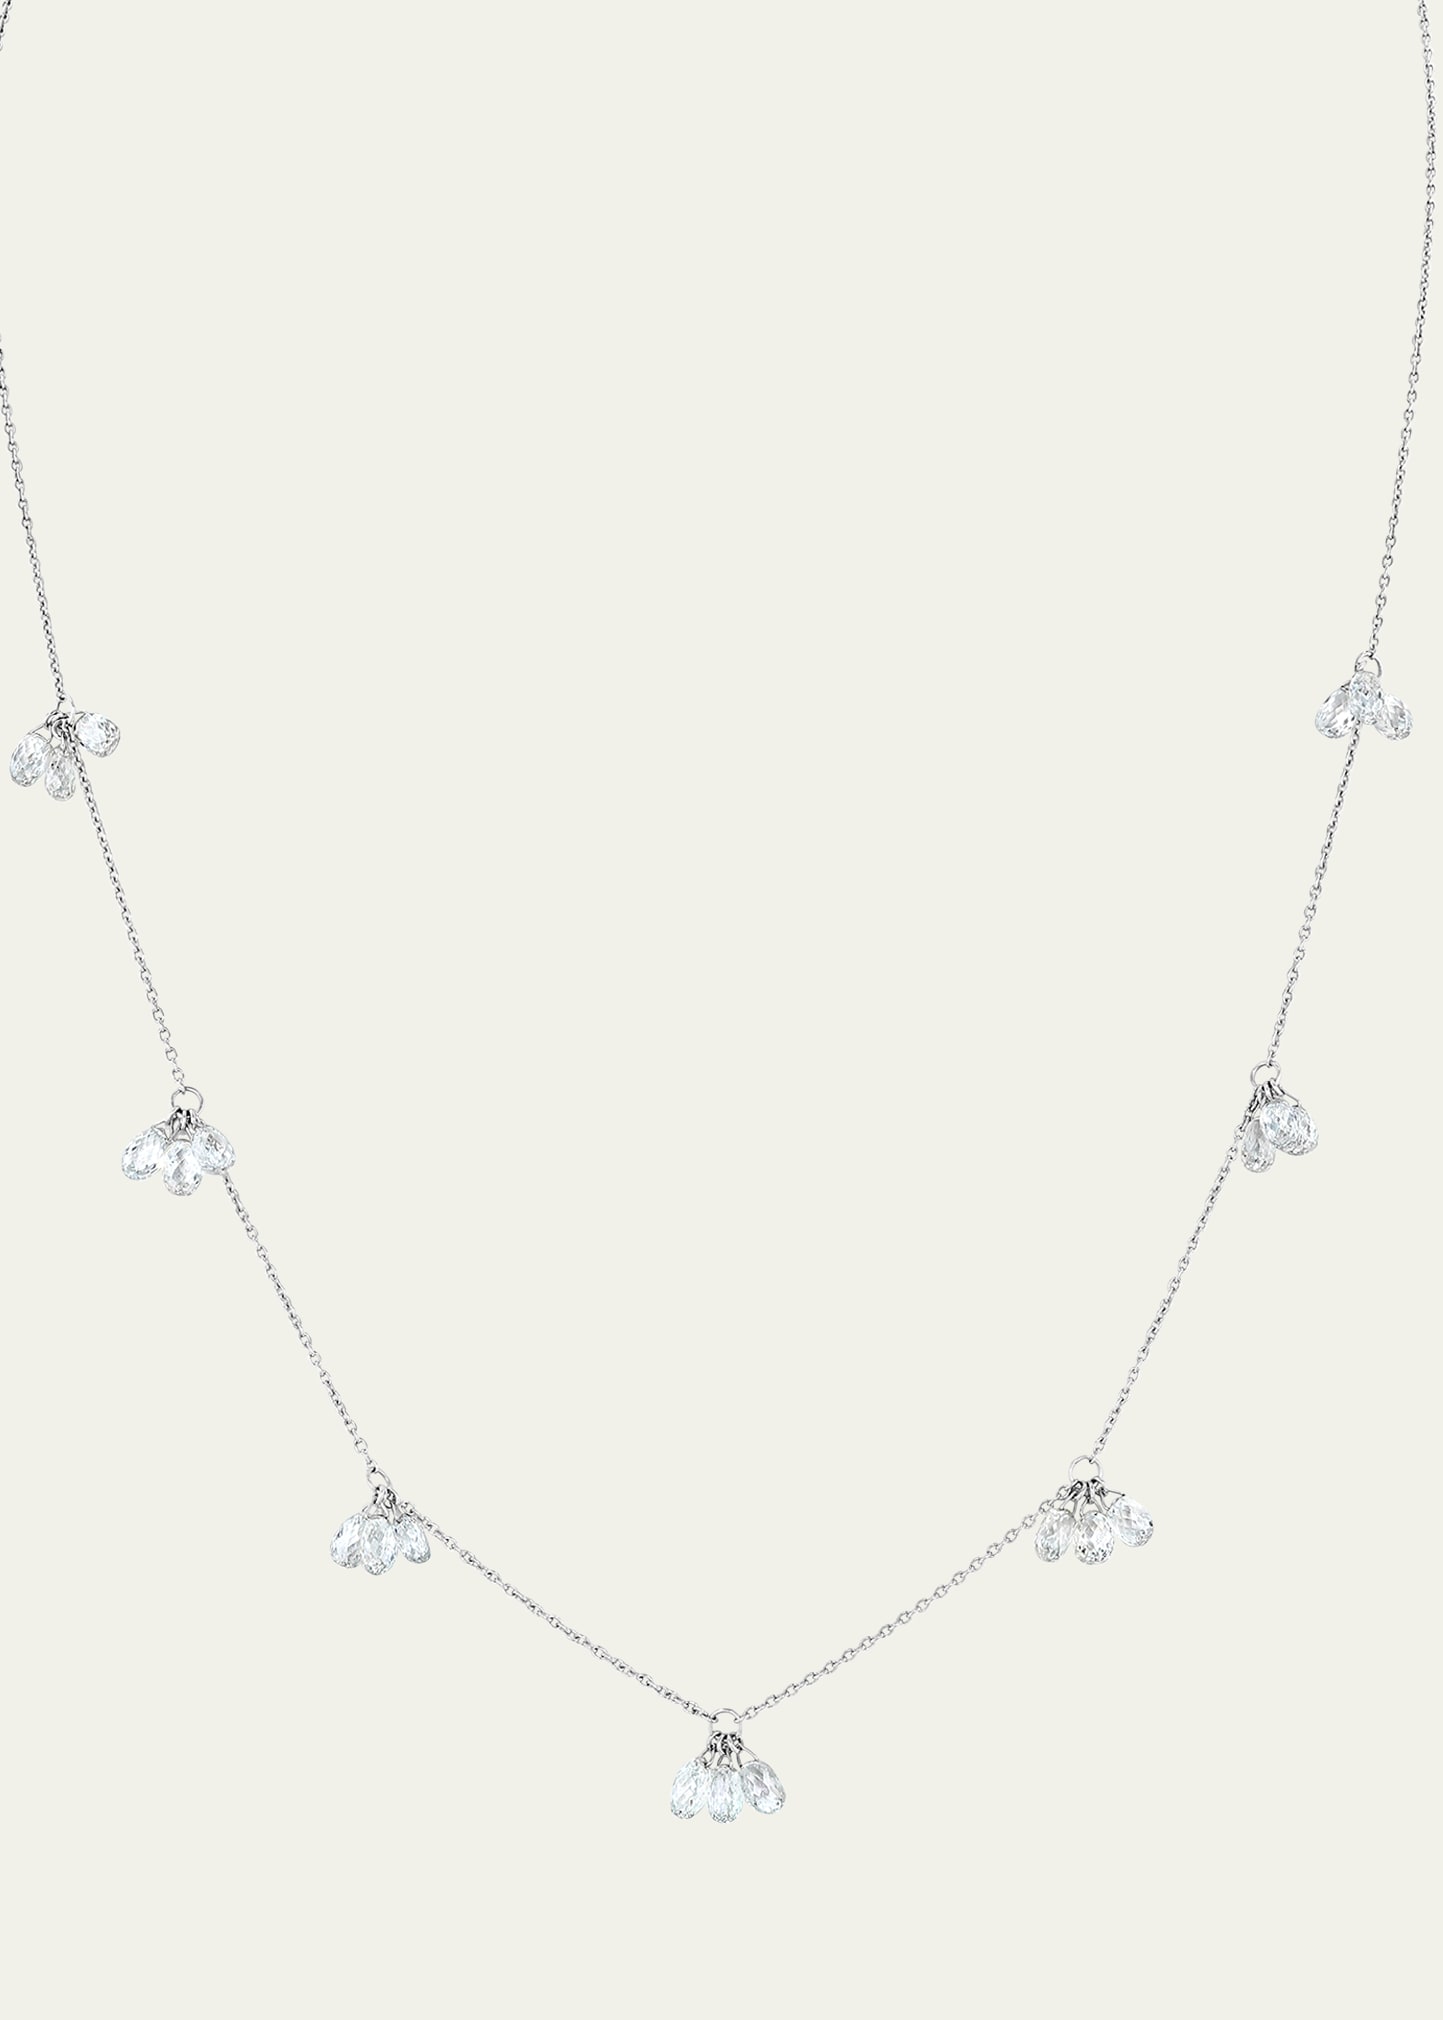 64 Facets 18k White Gold Cluster Diamond Necklace